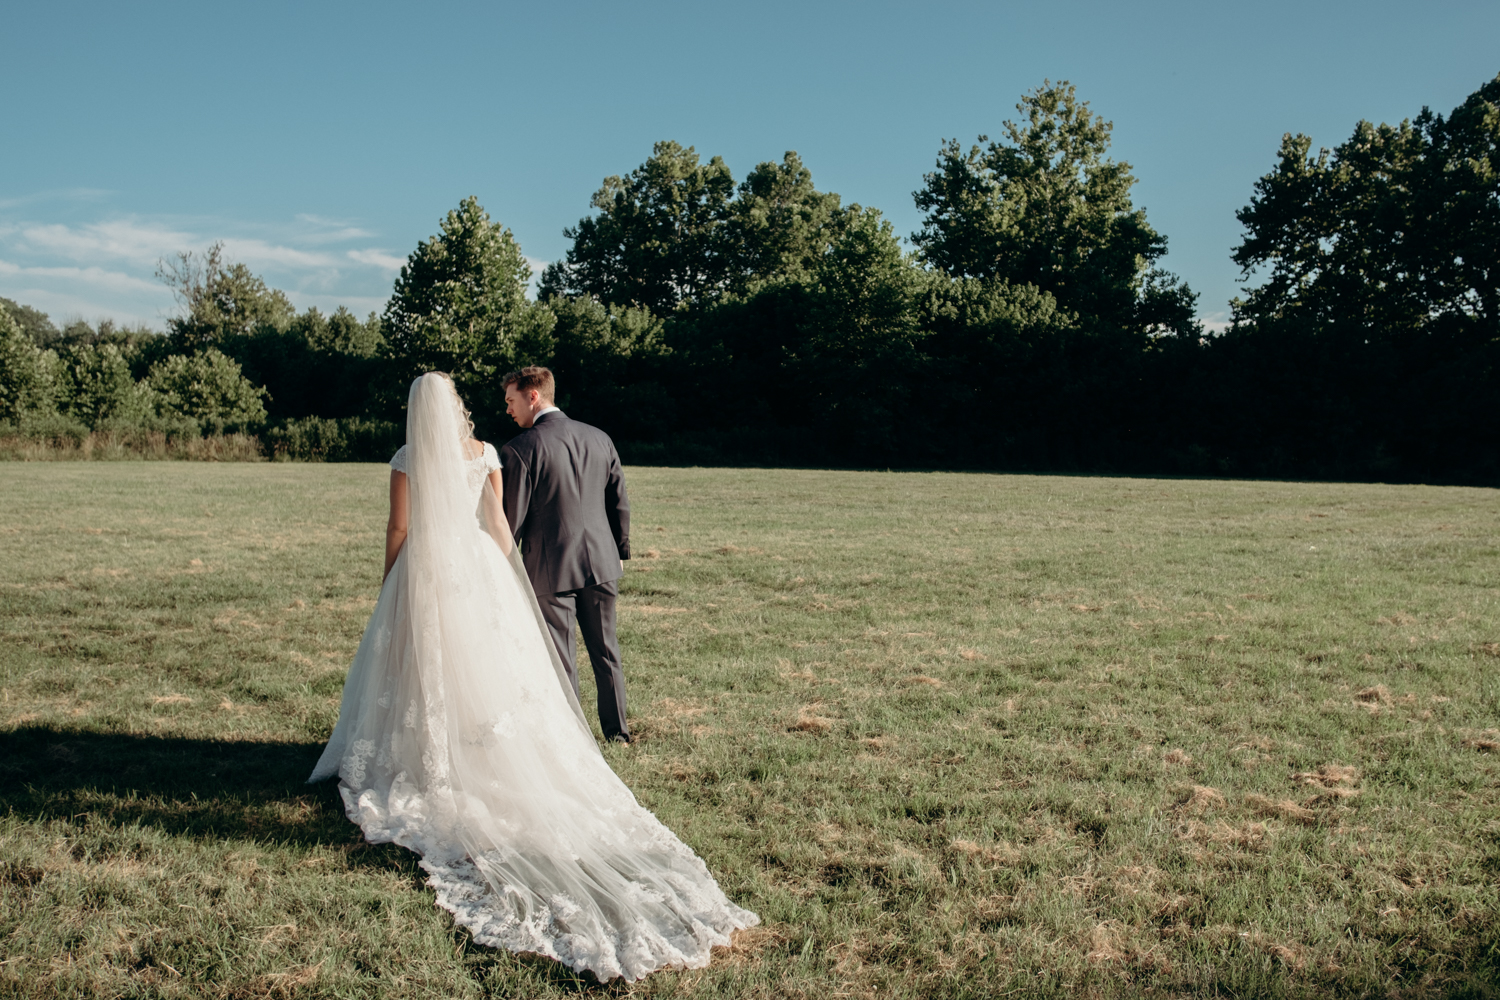 A husband and wife walk through a field in the sunshine after their outdoor wedding ceremony at Lansdowne Resort.